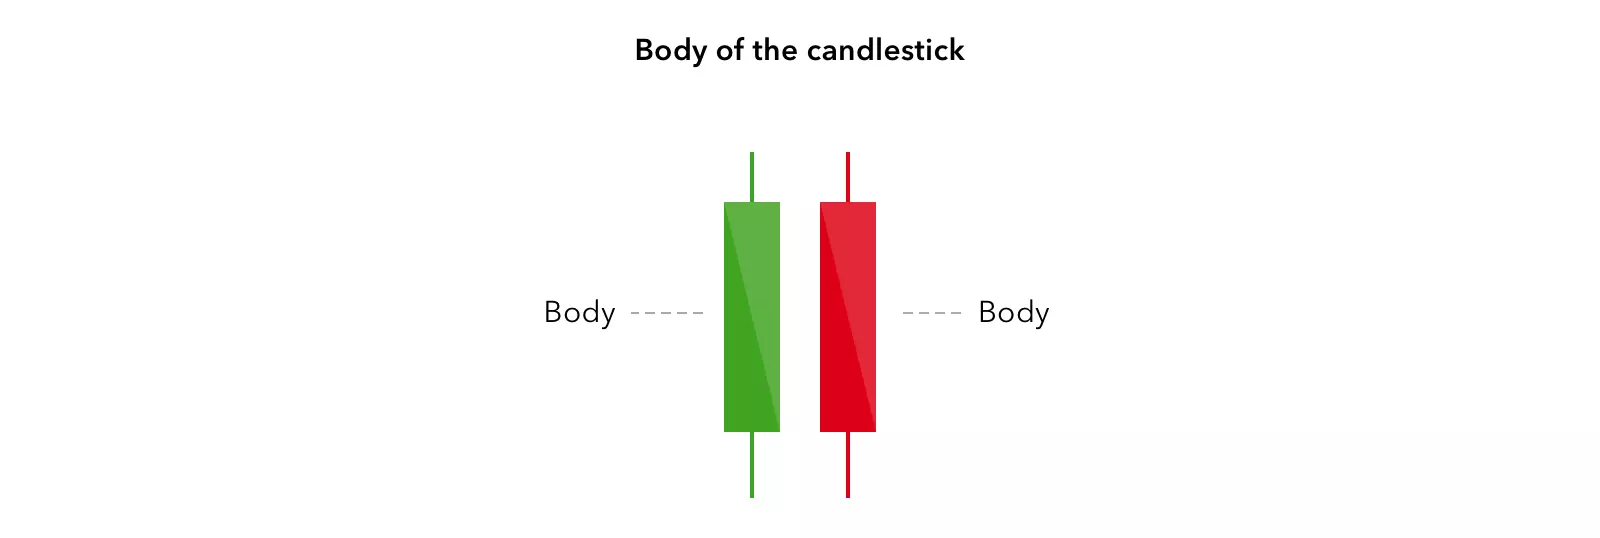 Body of the candlestick